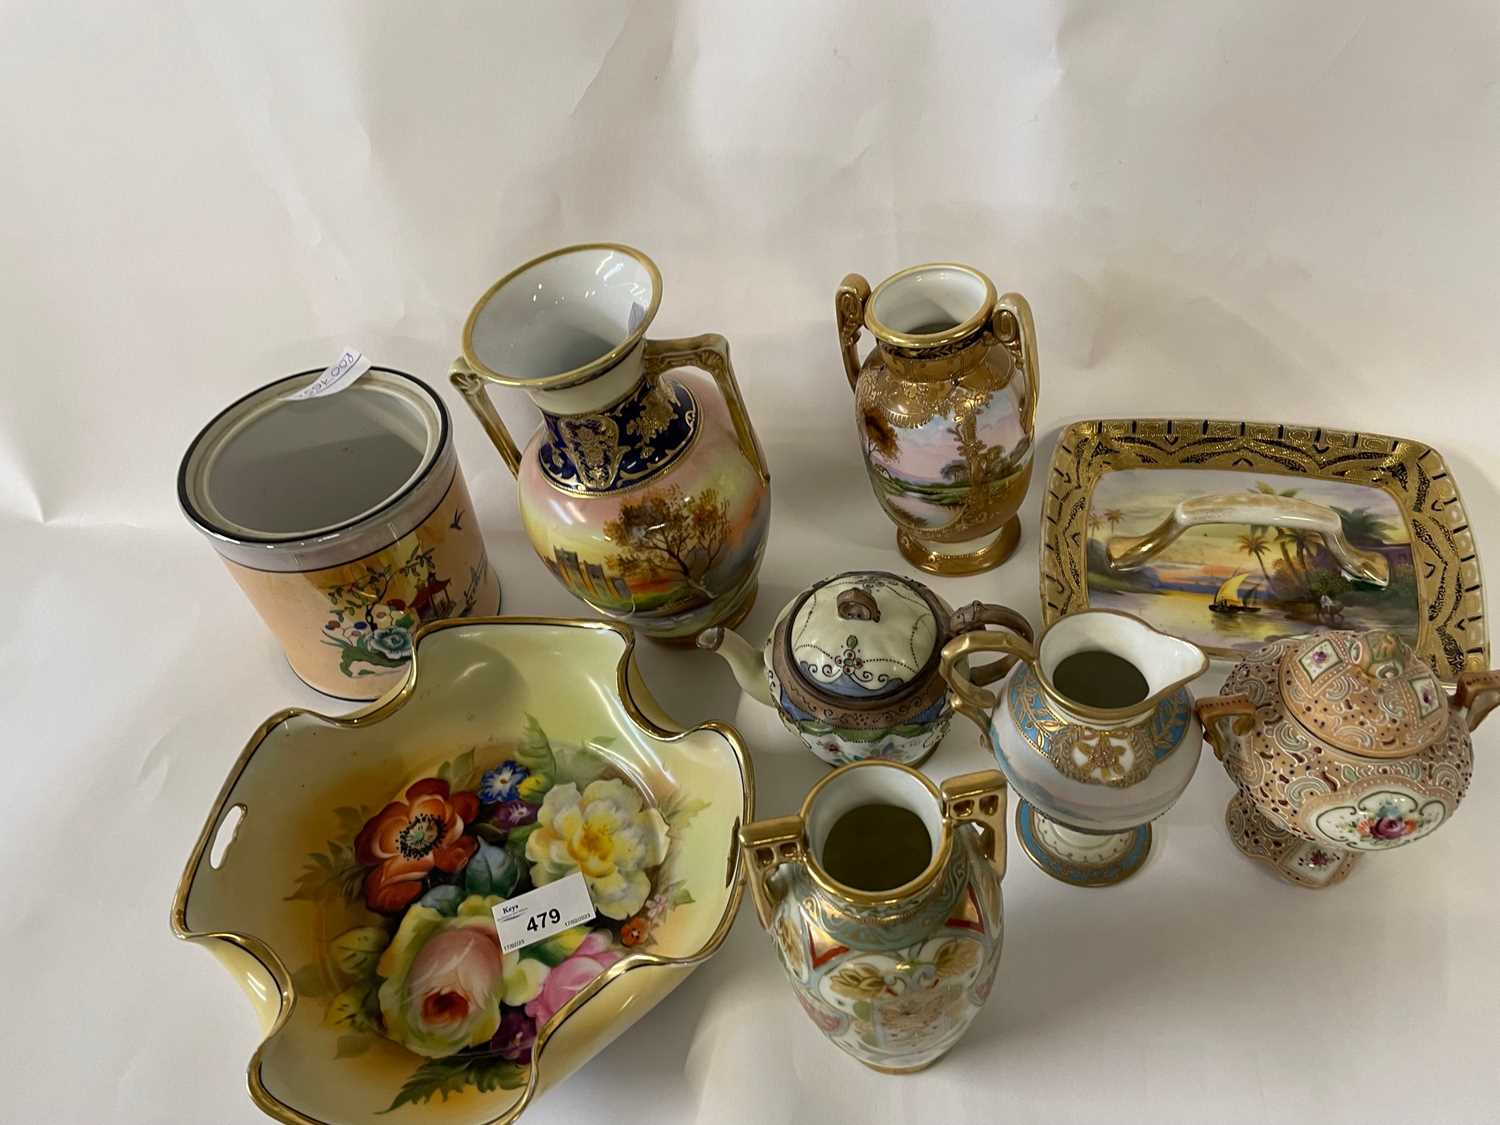 Further group of Noritake wares with floral and landscape designs - Image 2 of 2